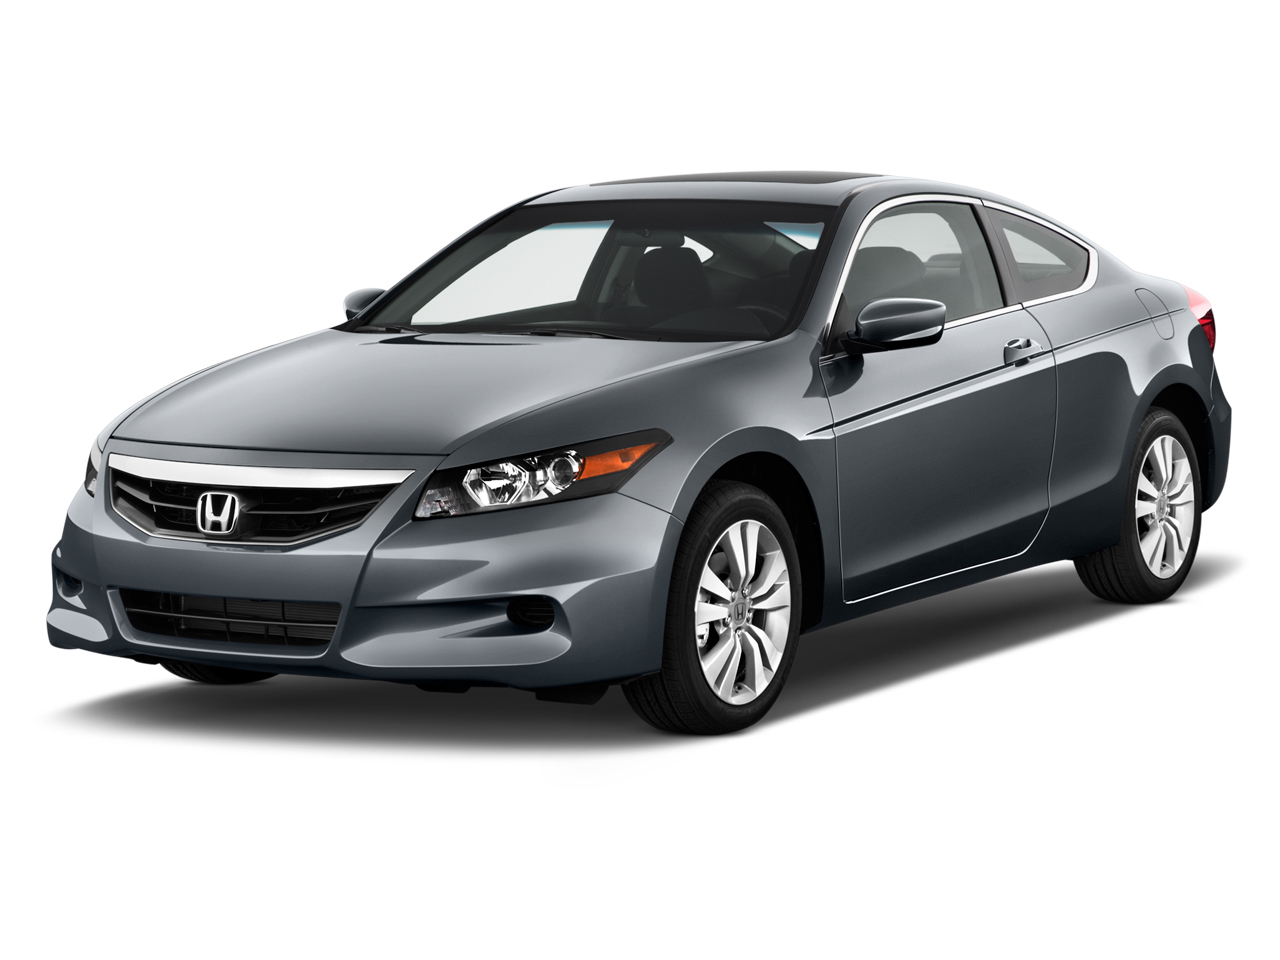 2012 Honda Accord Review Ratings Specs Prices And Photos